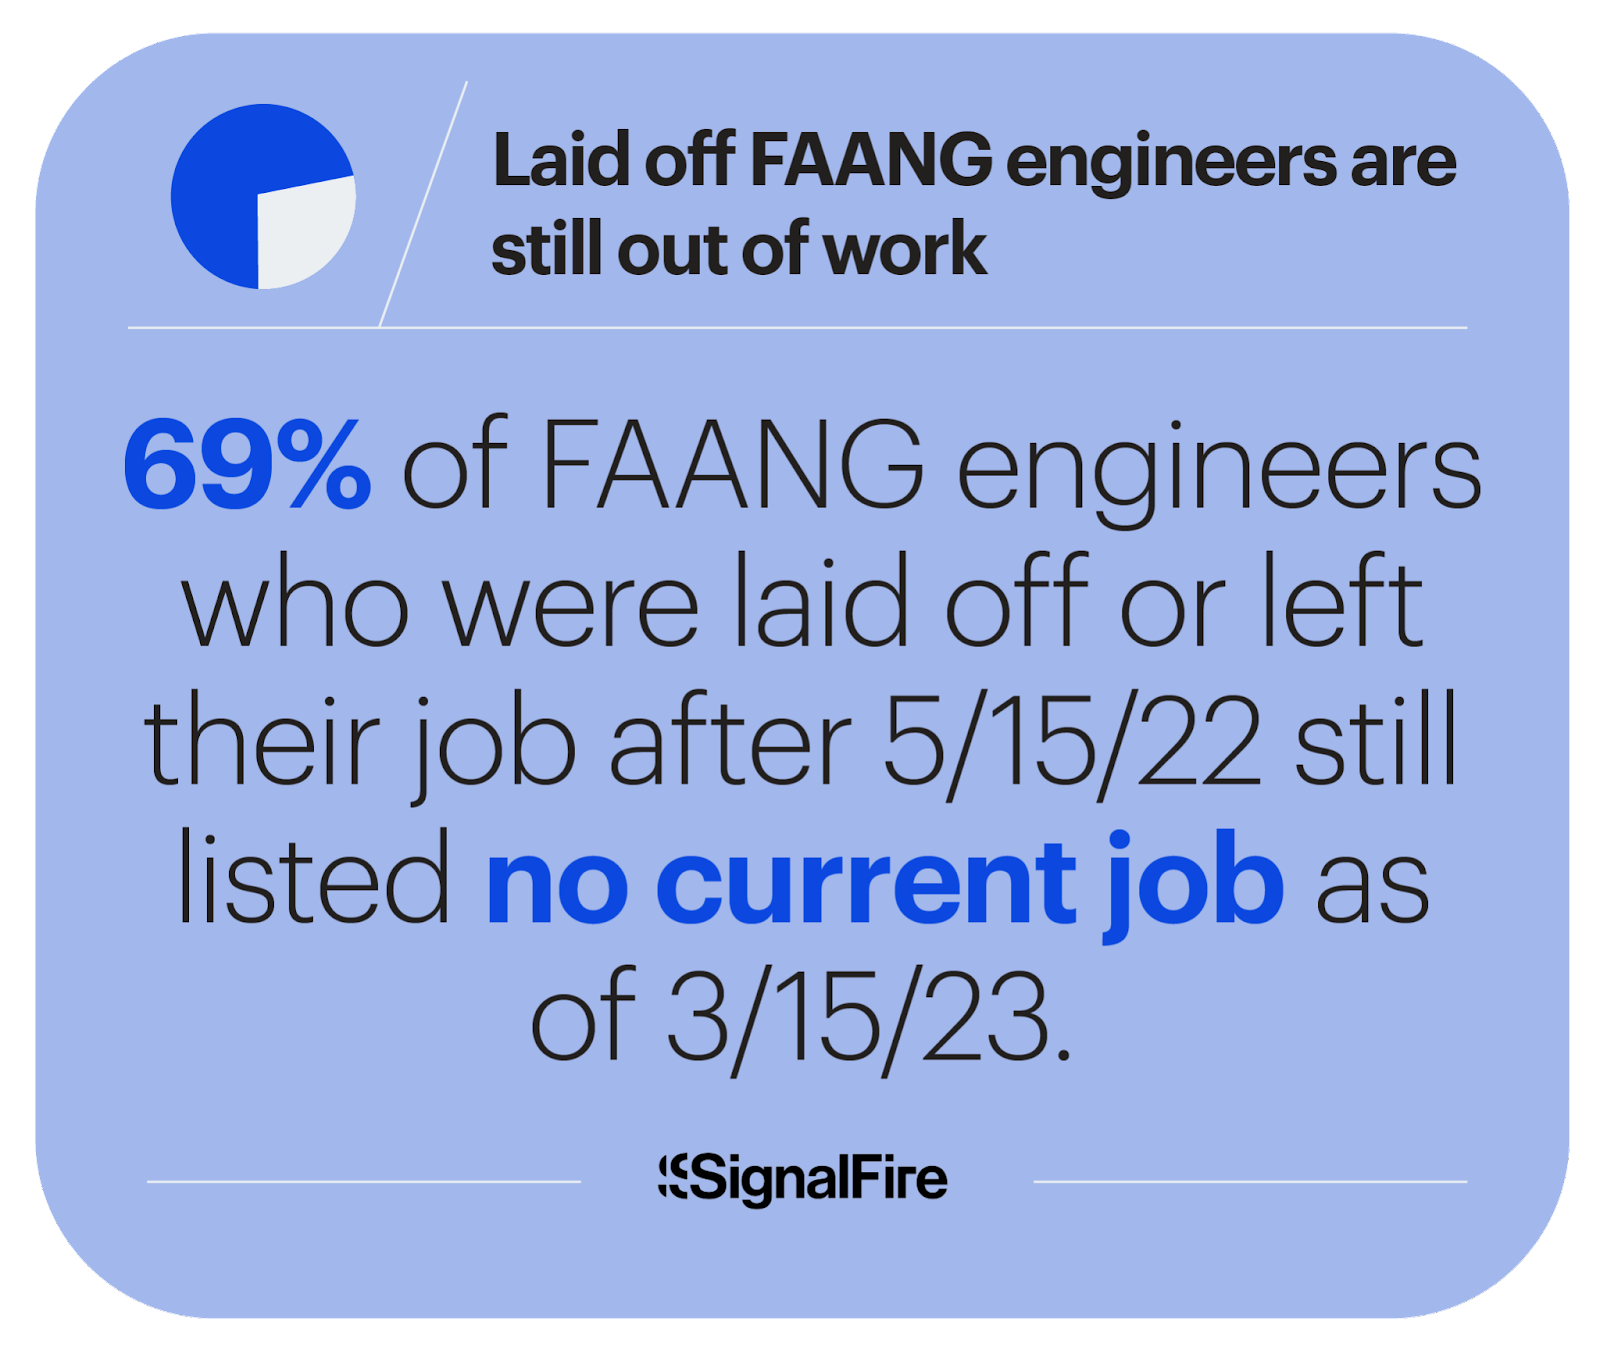 Most laid-off FAANG engineers are still out of work.